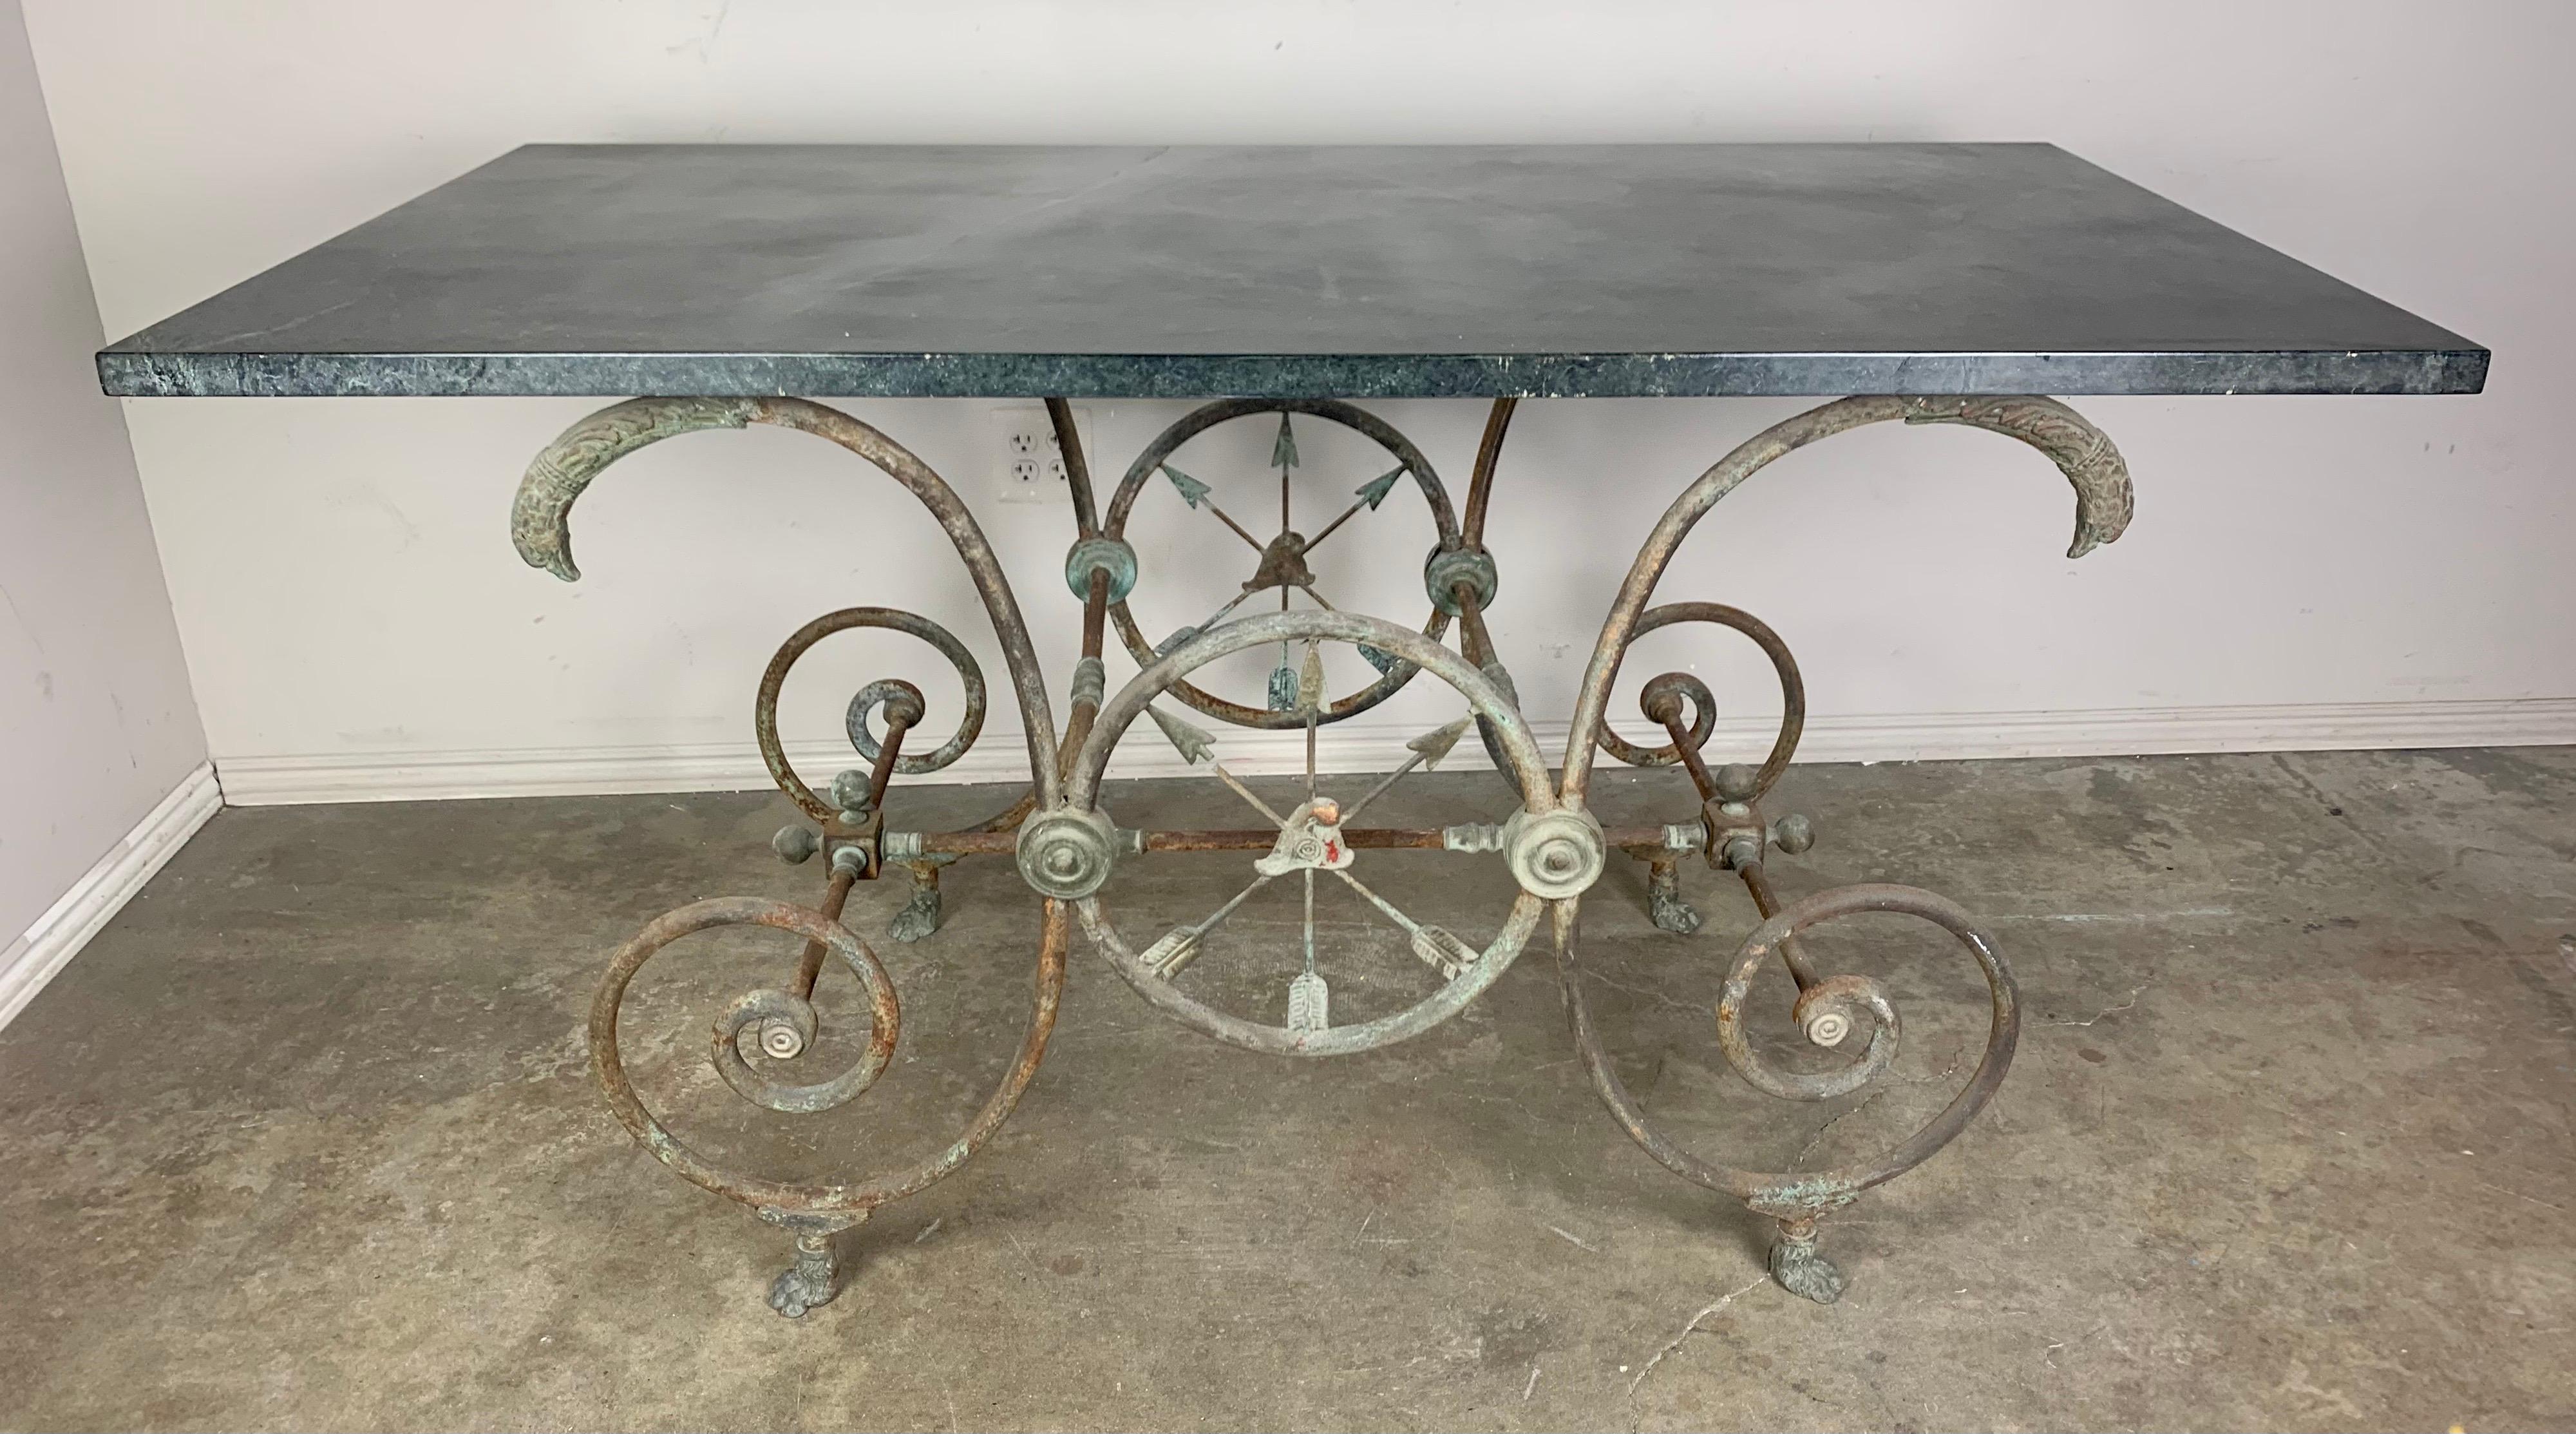 19th century French bistro table with marble top. The wrought iron and bronze base depict circle with crossed arrows. There are bird heads at the top of the scrolled bases that hold up the marble top. The are beautiful details throughout this bistro